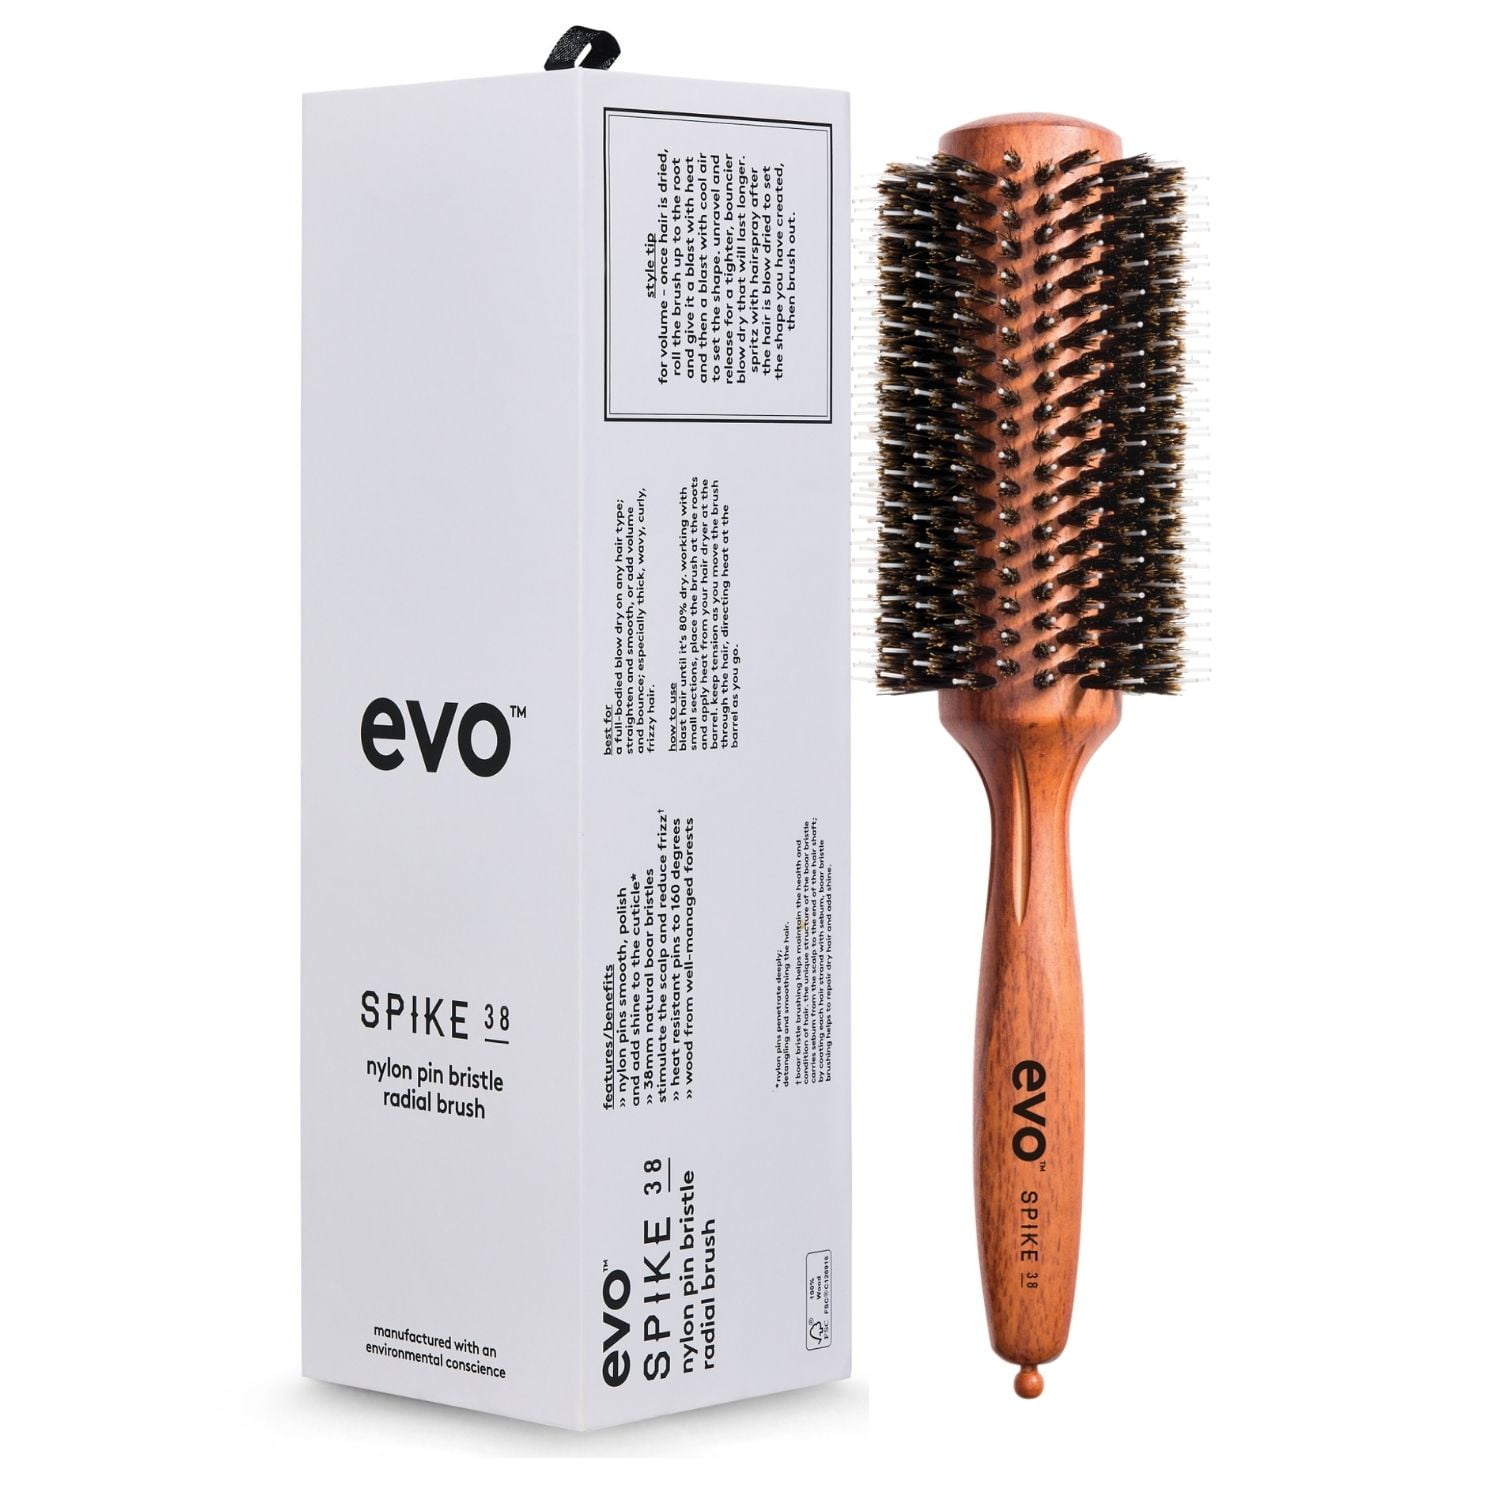 Nylon Brush: What Is It? How Is It Used? Types, Benefits